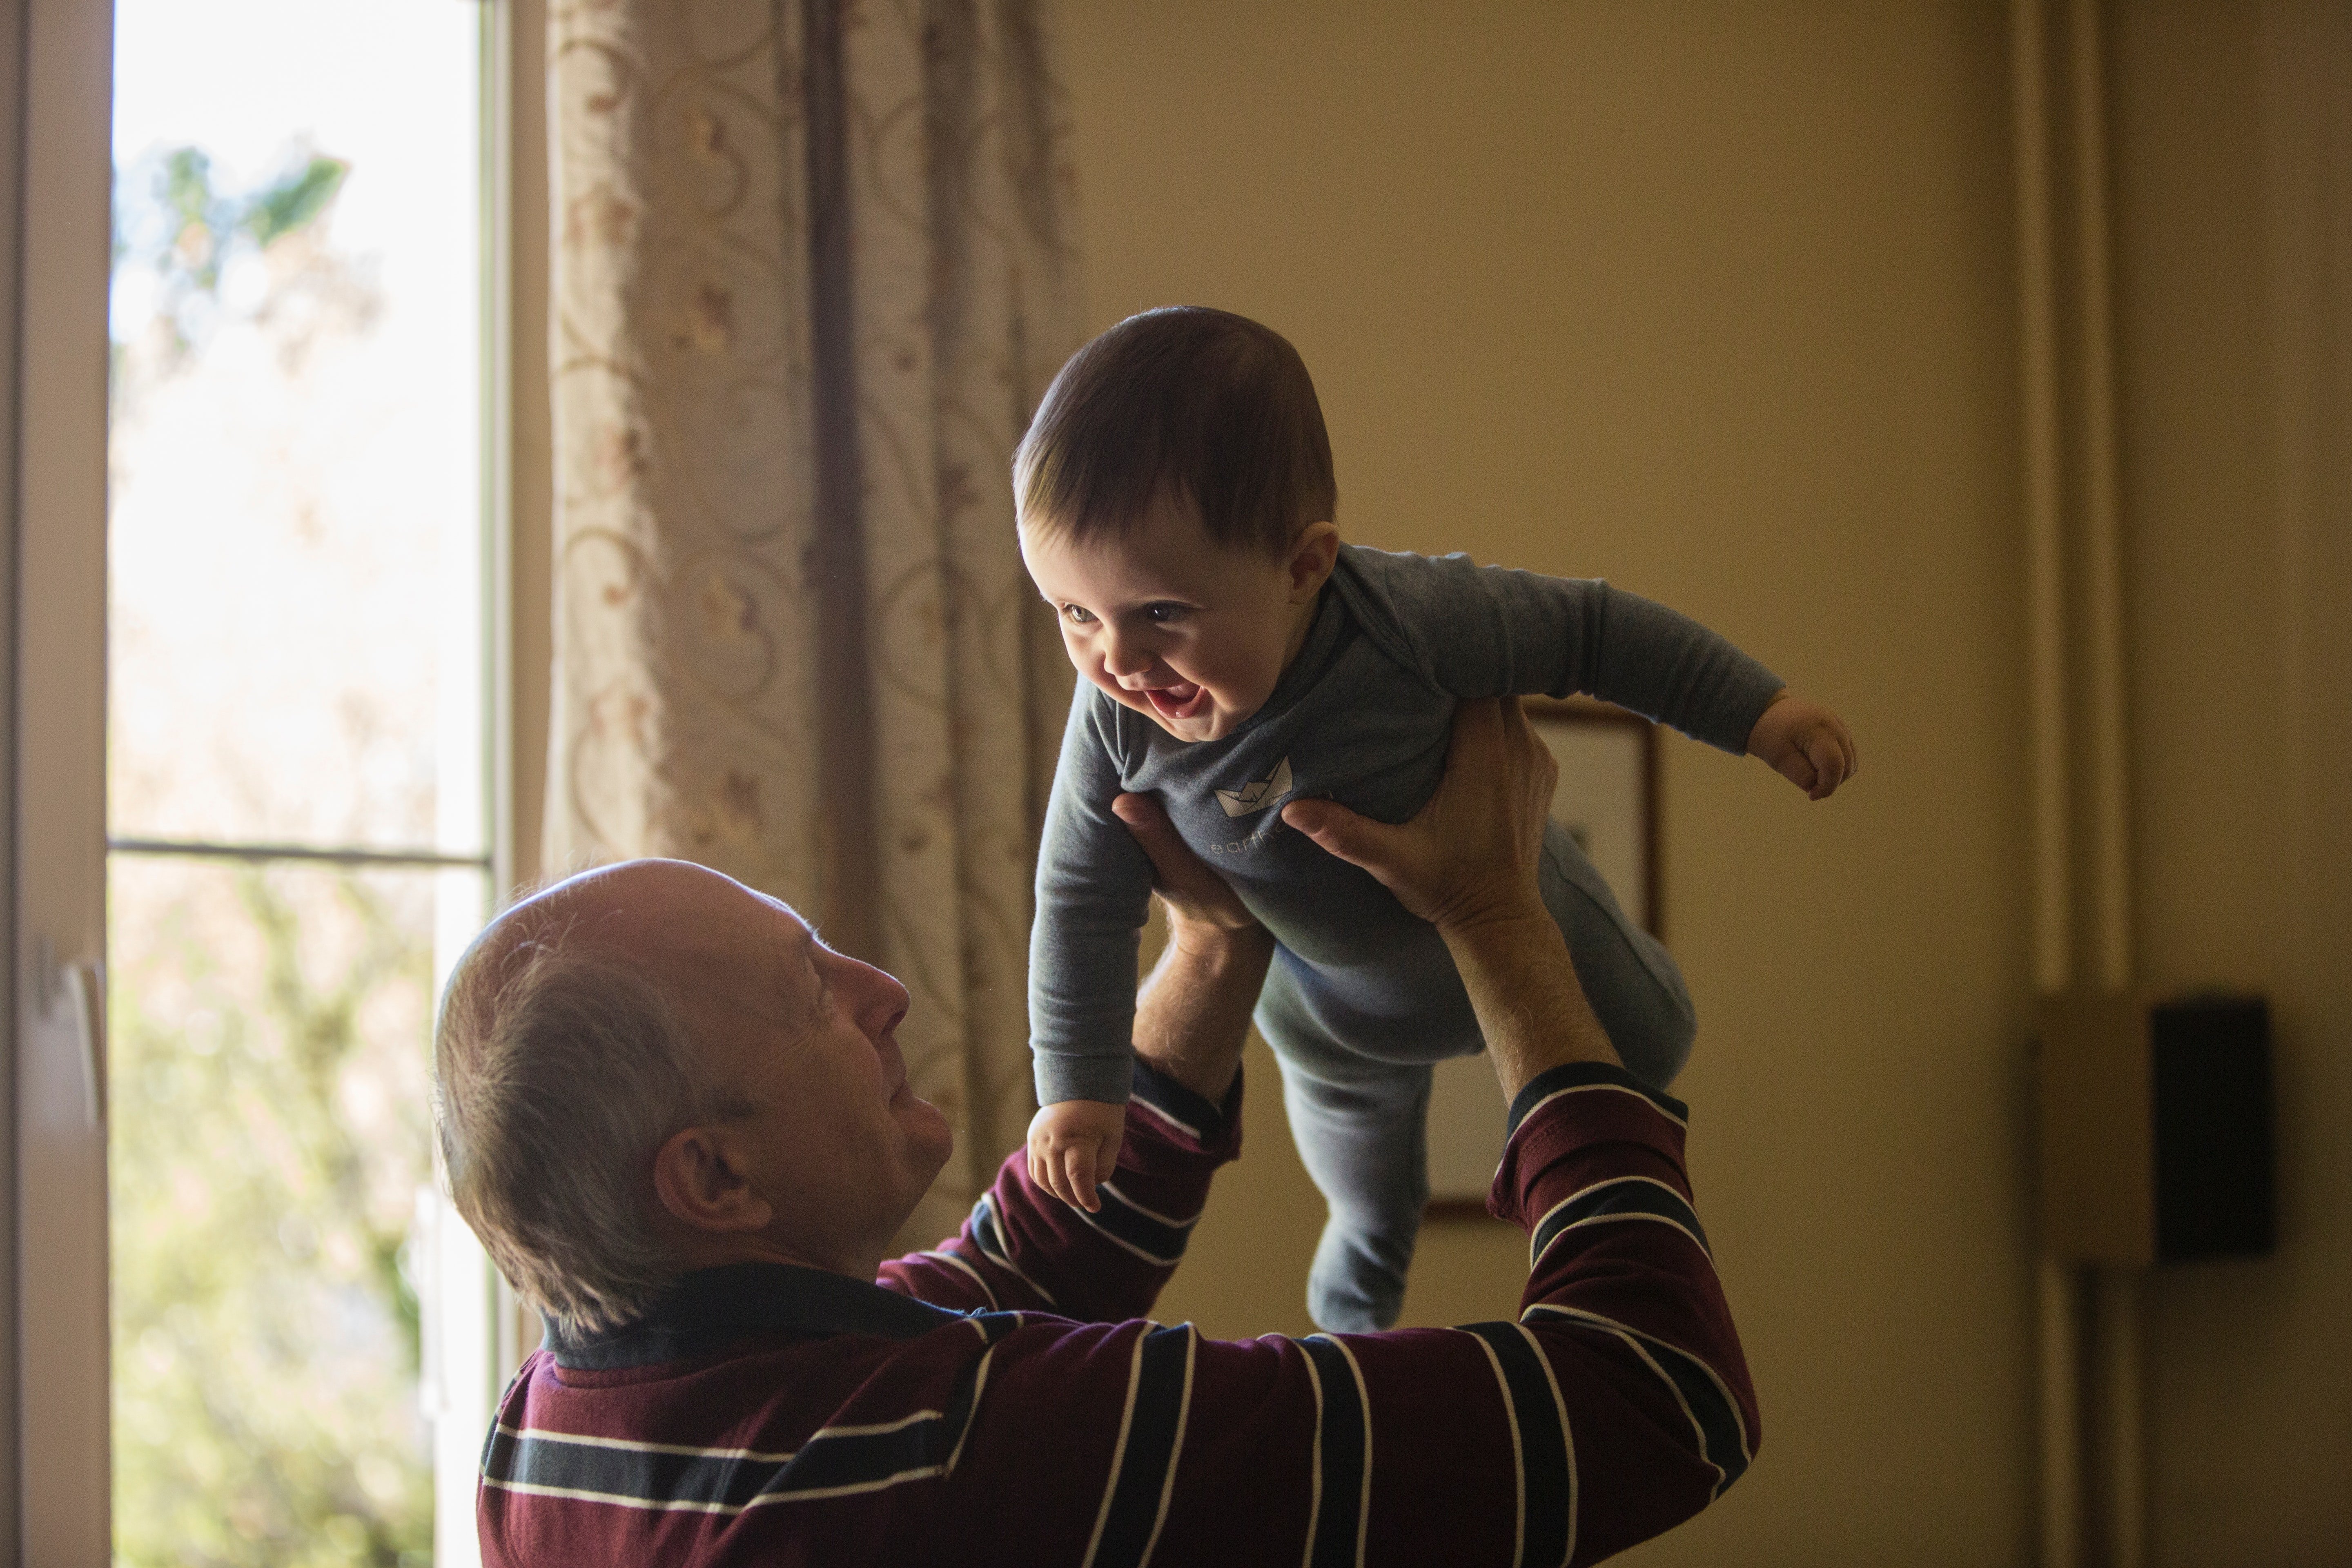 The man's grandpa was his only sole provider since his childhood. | Source: Unsplash 